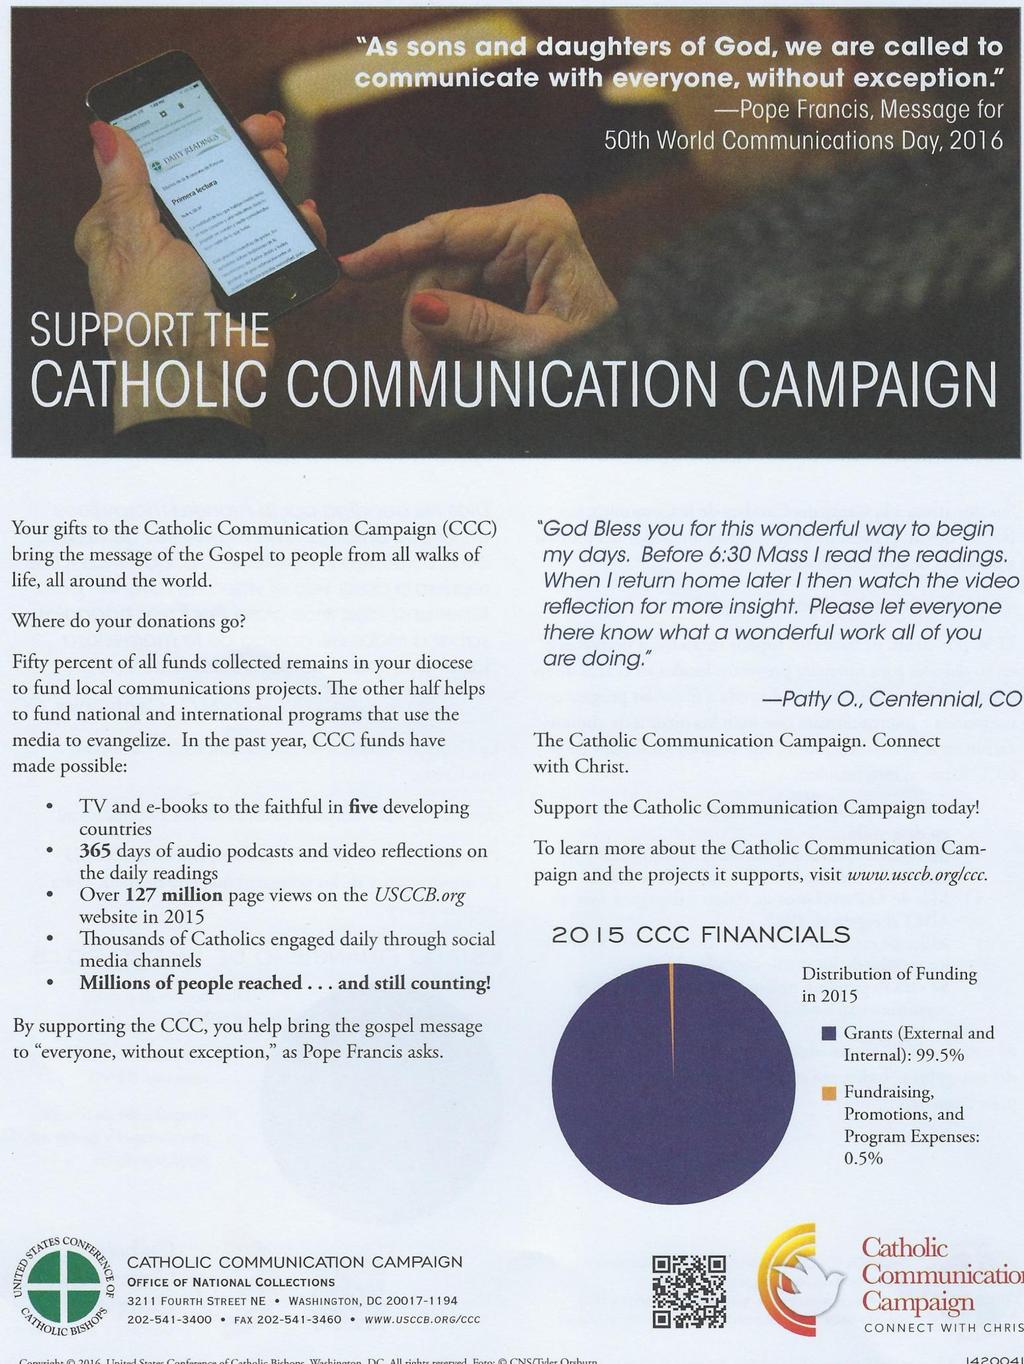 Your gifts to the Catholic Communication Campaign (CCC) bring the message of the Gospel to people from all walks of life, all around the world. Where do your donations go?